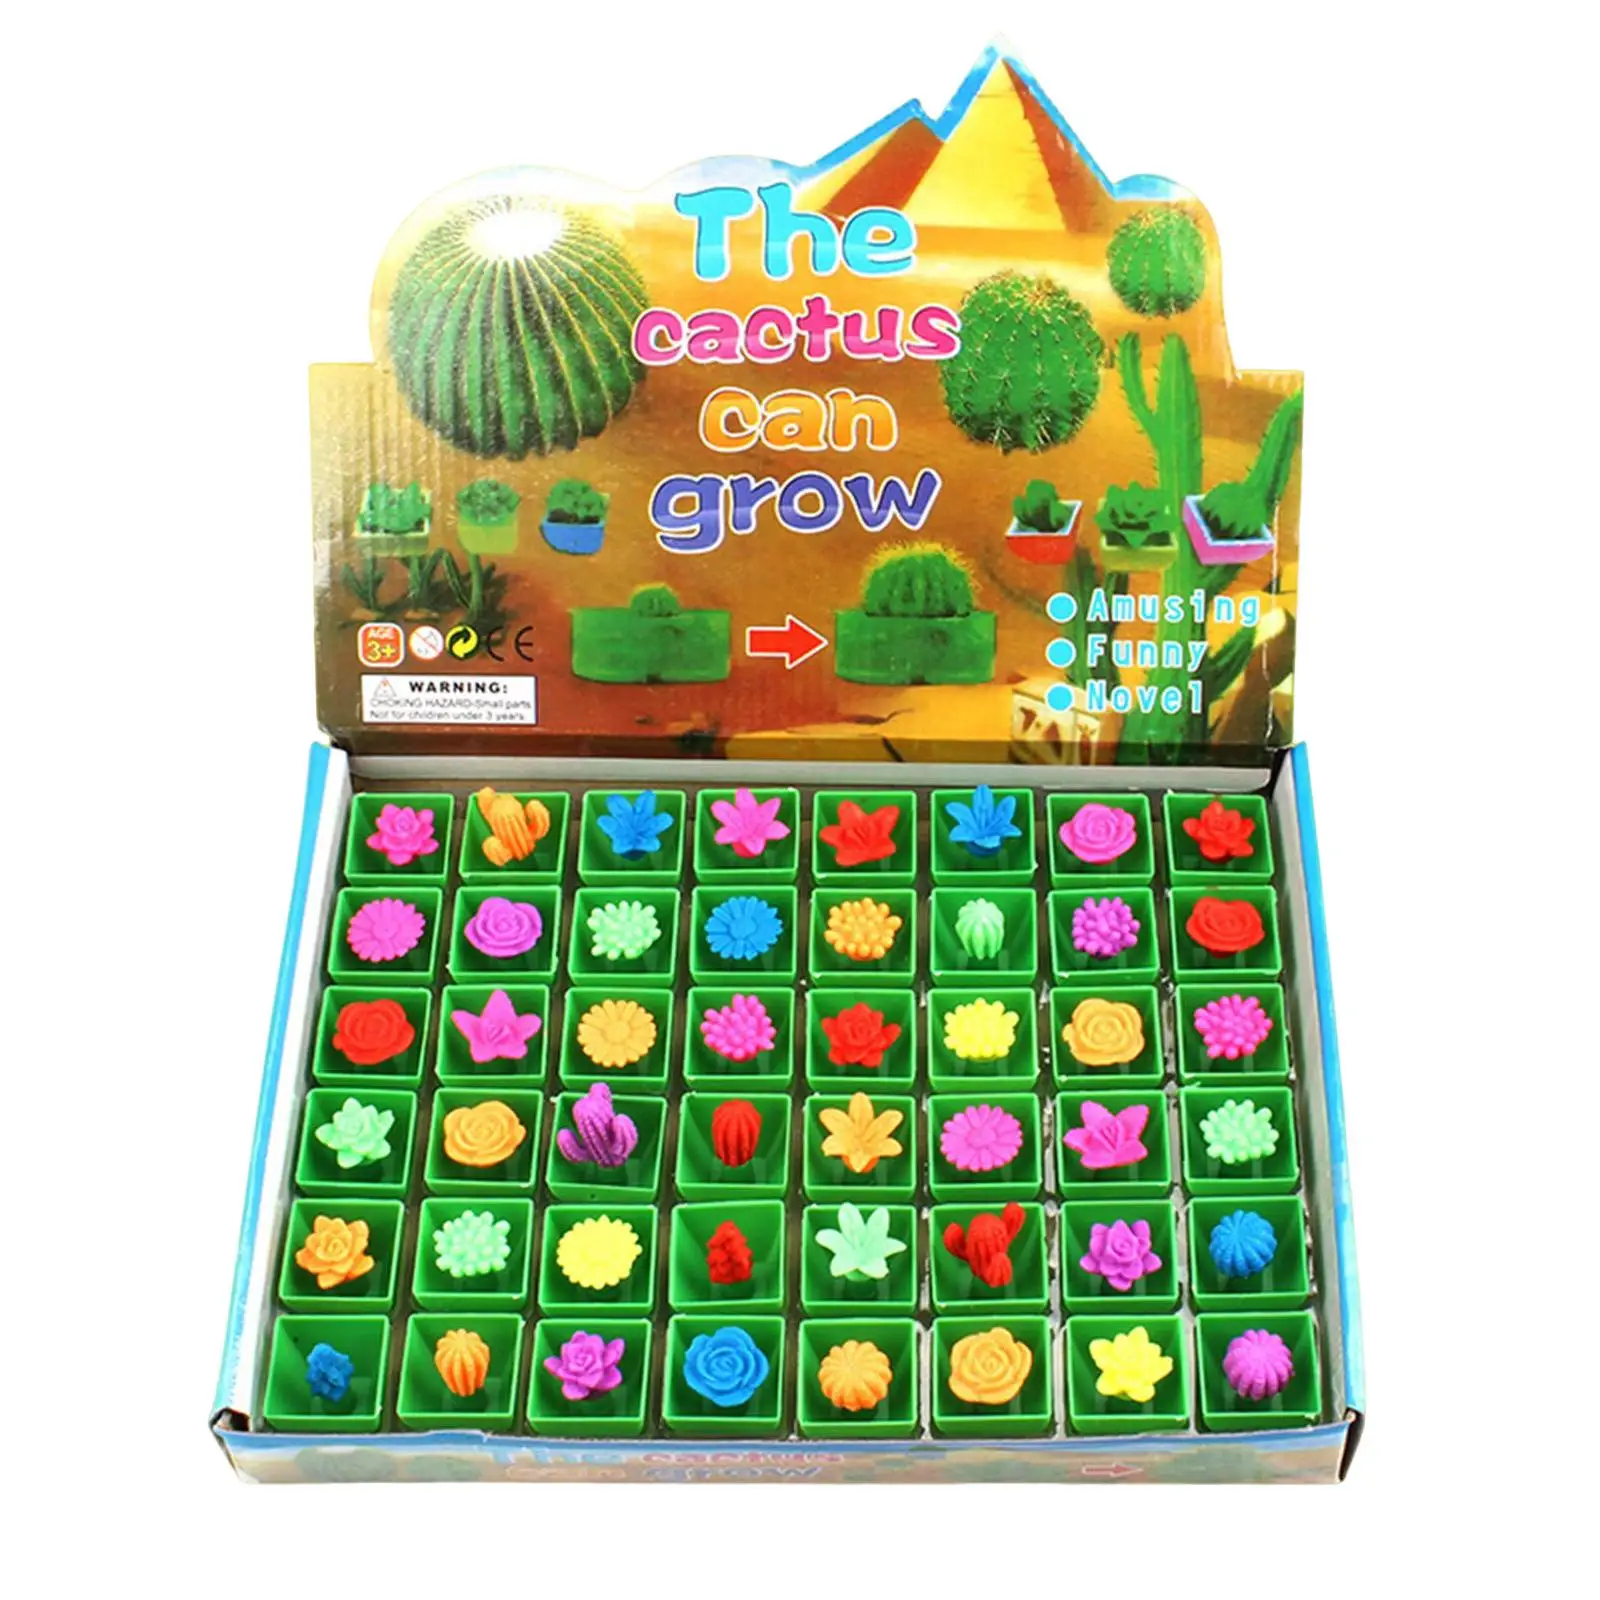 48x Grow in Water Toys Easter Egg Filler Grow Expansion Plant for Kids Best Gift